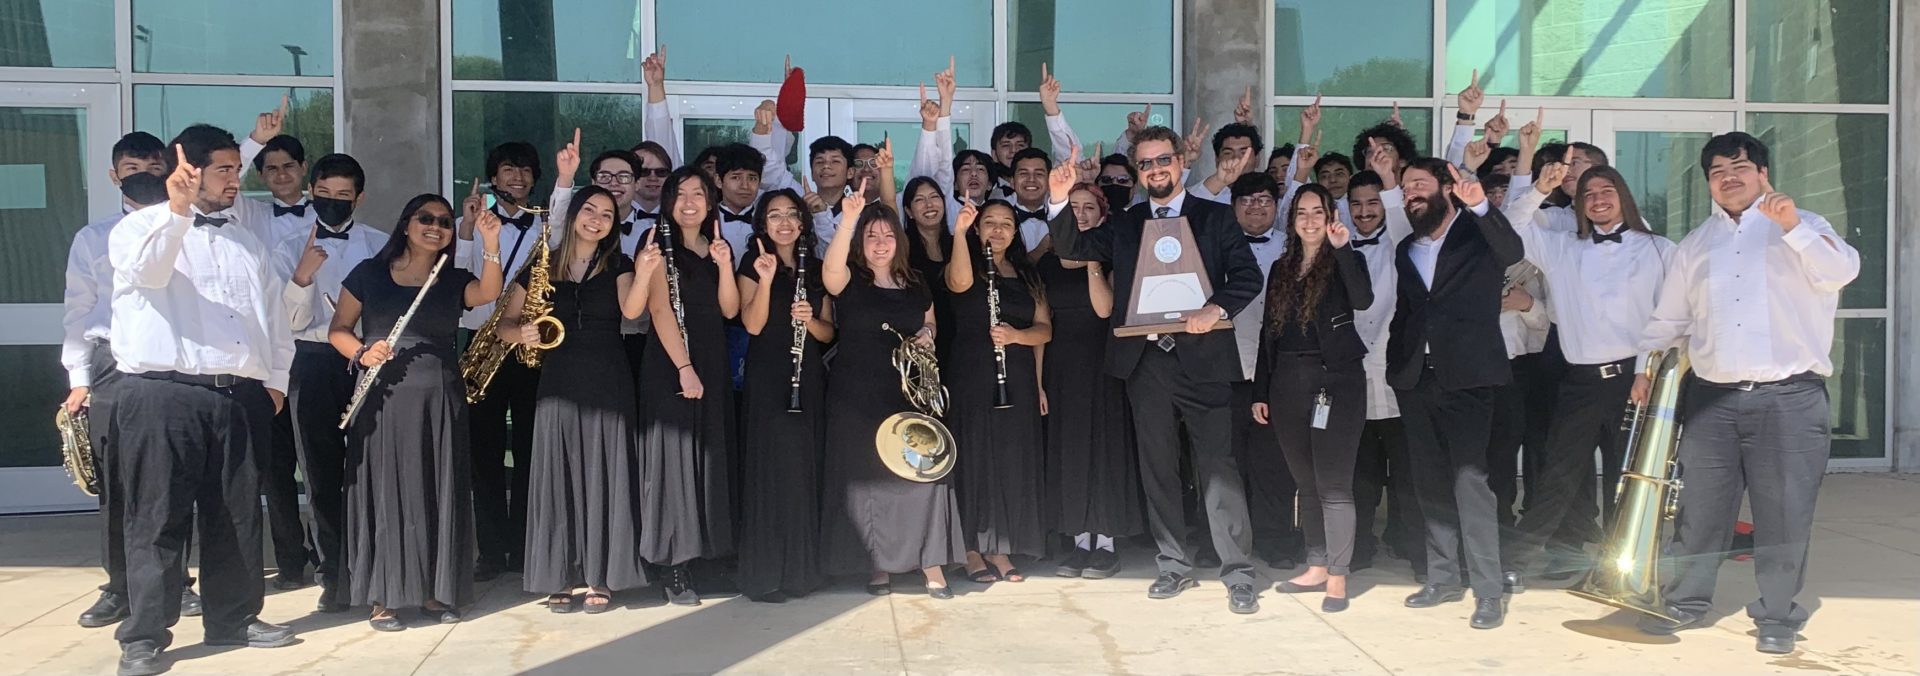 The Southside High School varsity wind ensemble along with Ms. Anna Casillas (asst. director), Mr. Michael Misko (head director), and Mr. Benjamin Swaner (percussion instructor/FA tutor) celebrate their victory. 